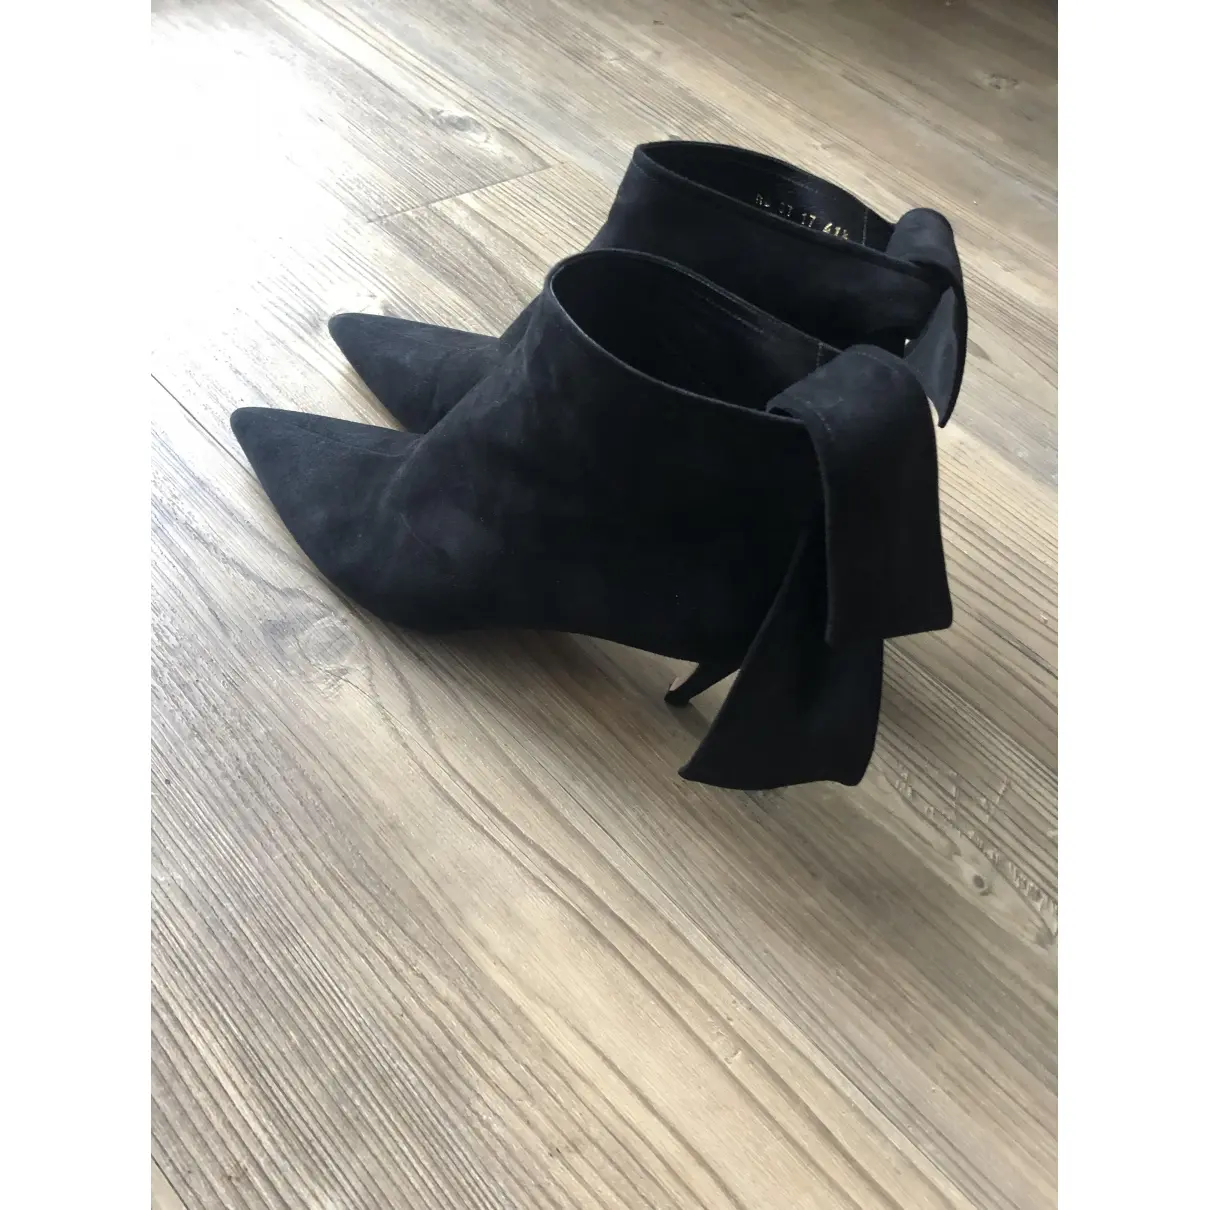 Dior D-Choc ankle boots for sale